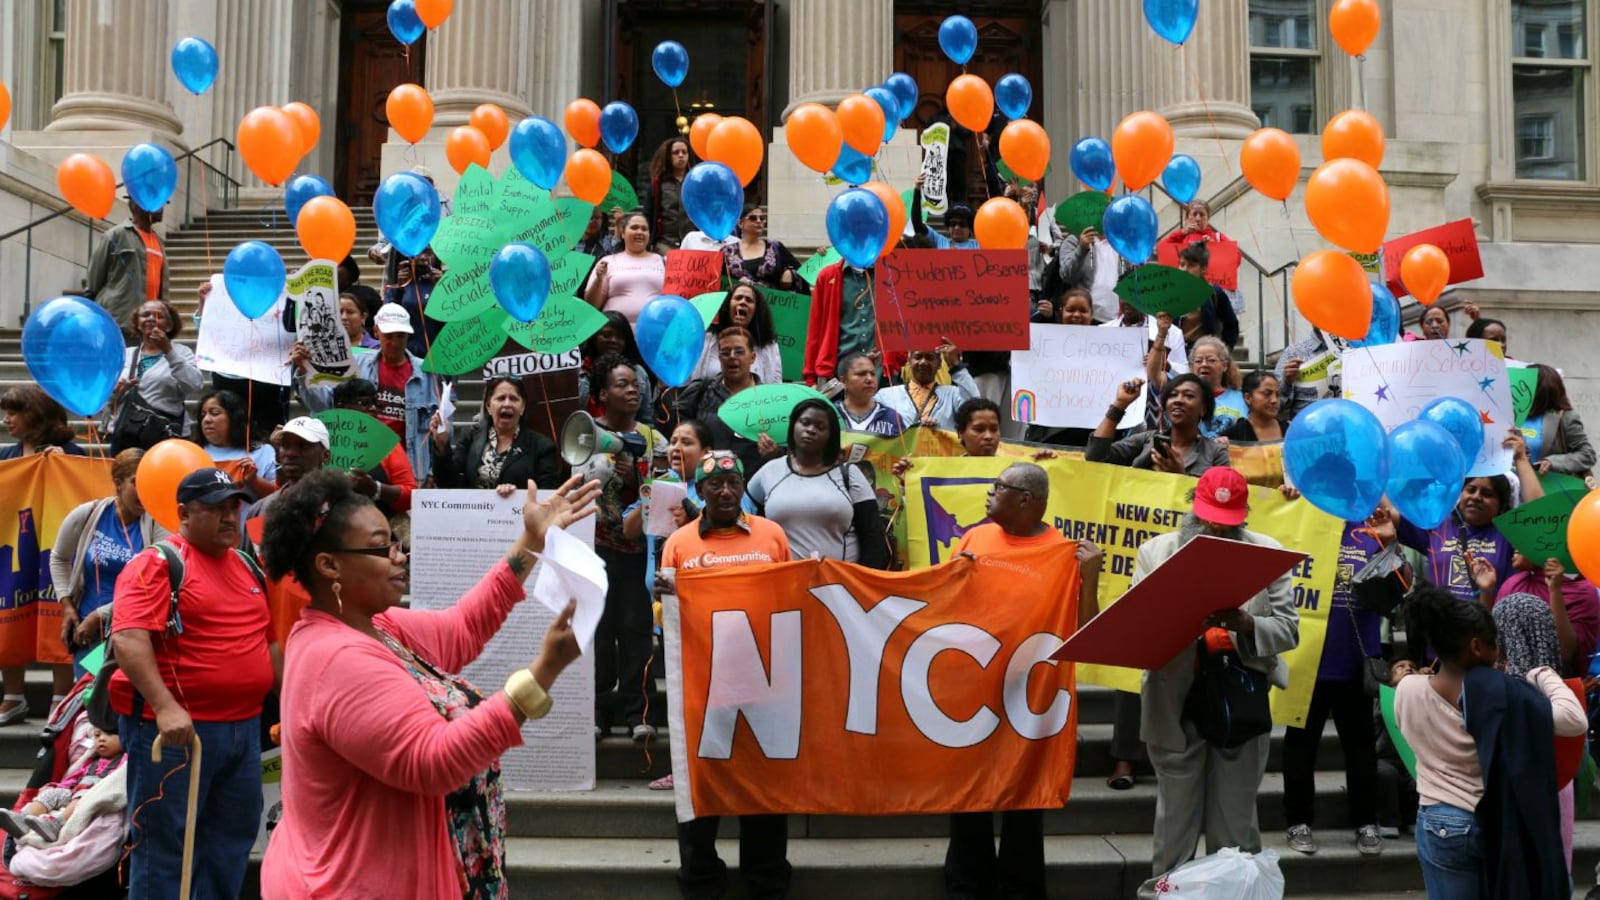 Community school proponents rallied in front of education department headquarters Tuesday.